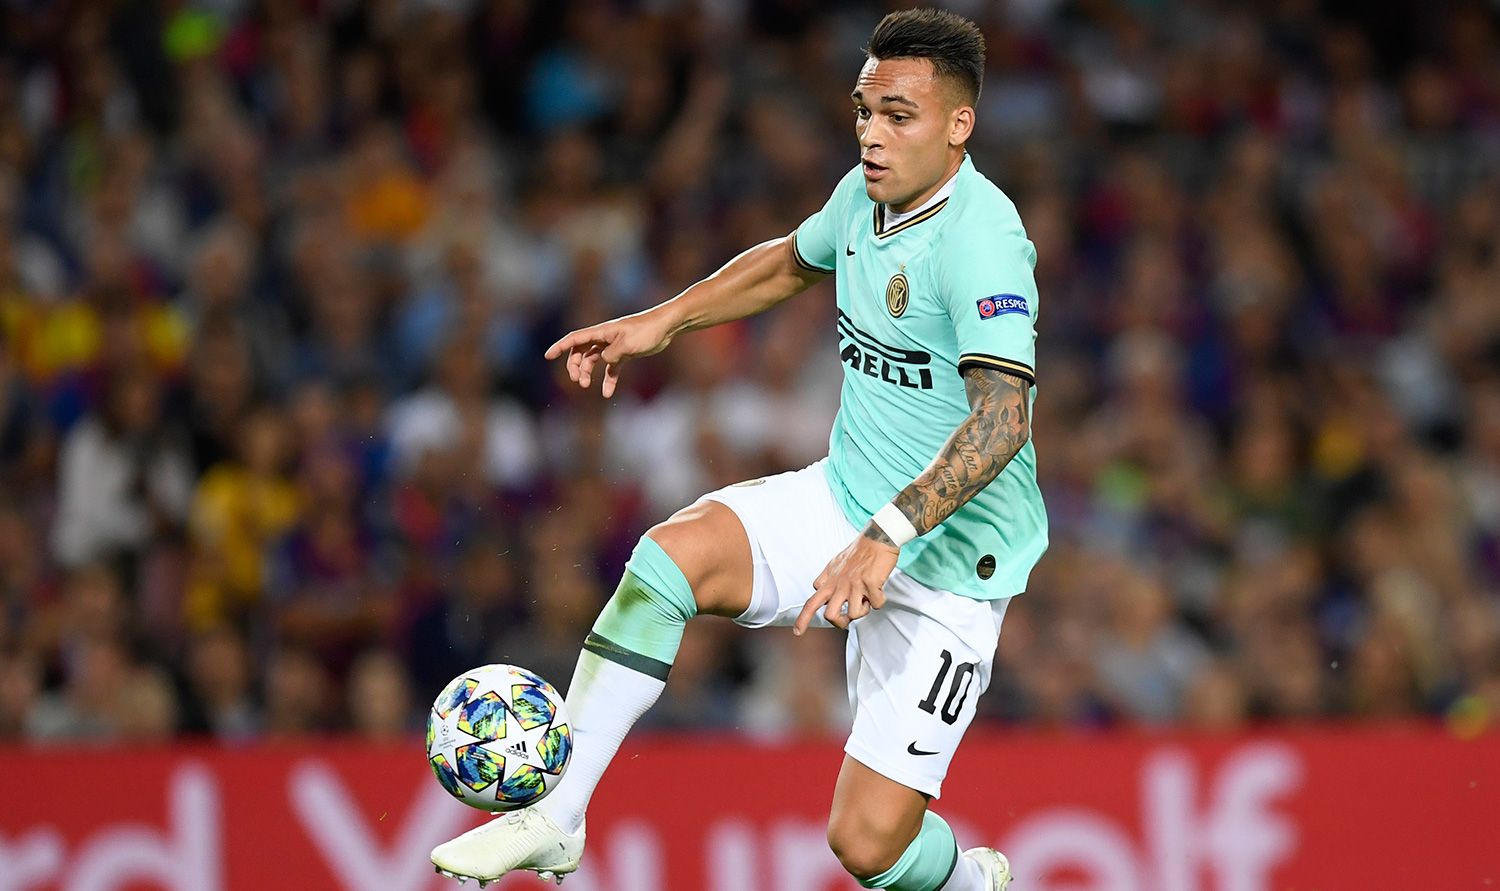 Lautaro Martínez in a played of the party against the Barça